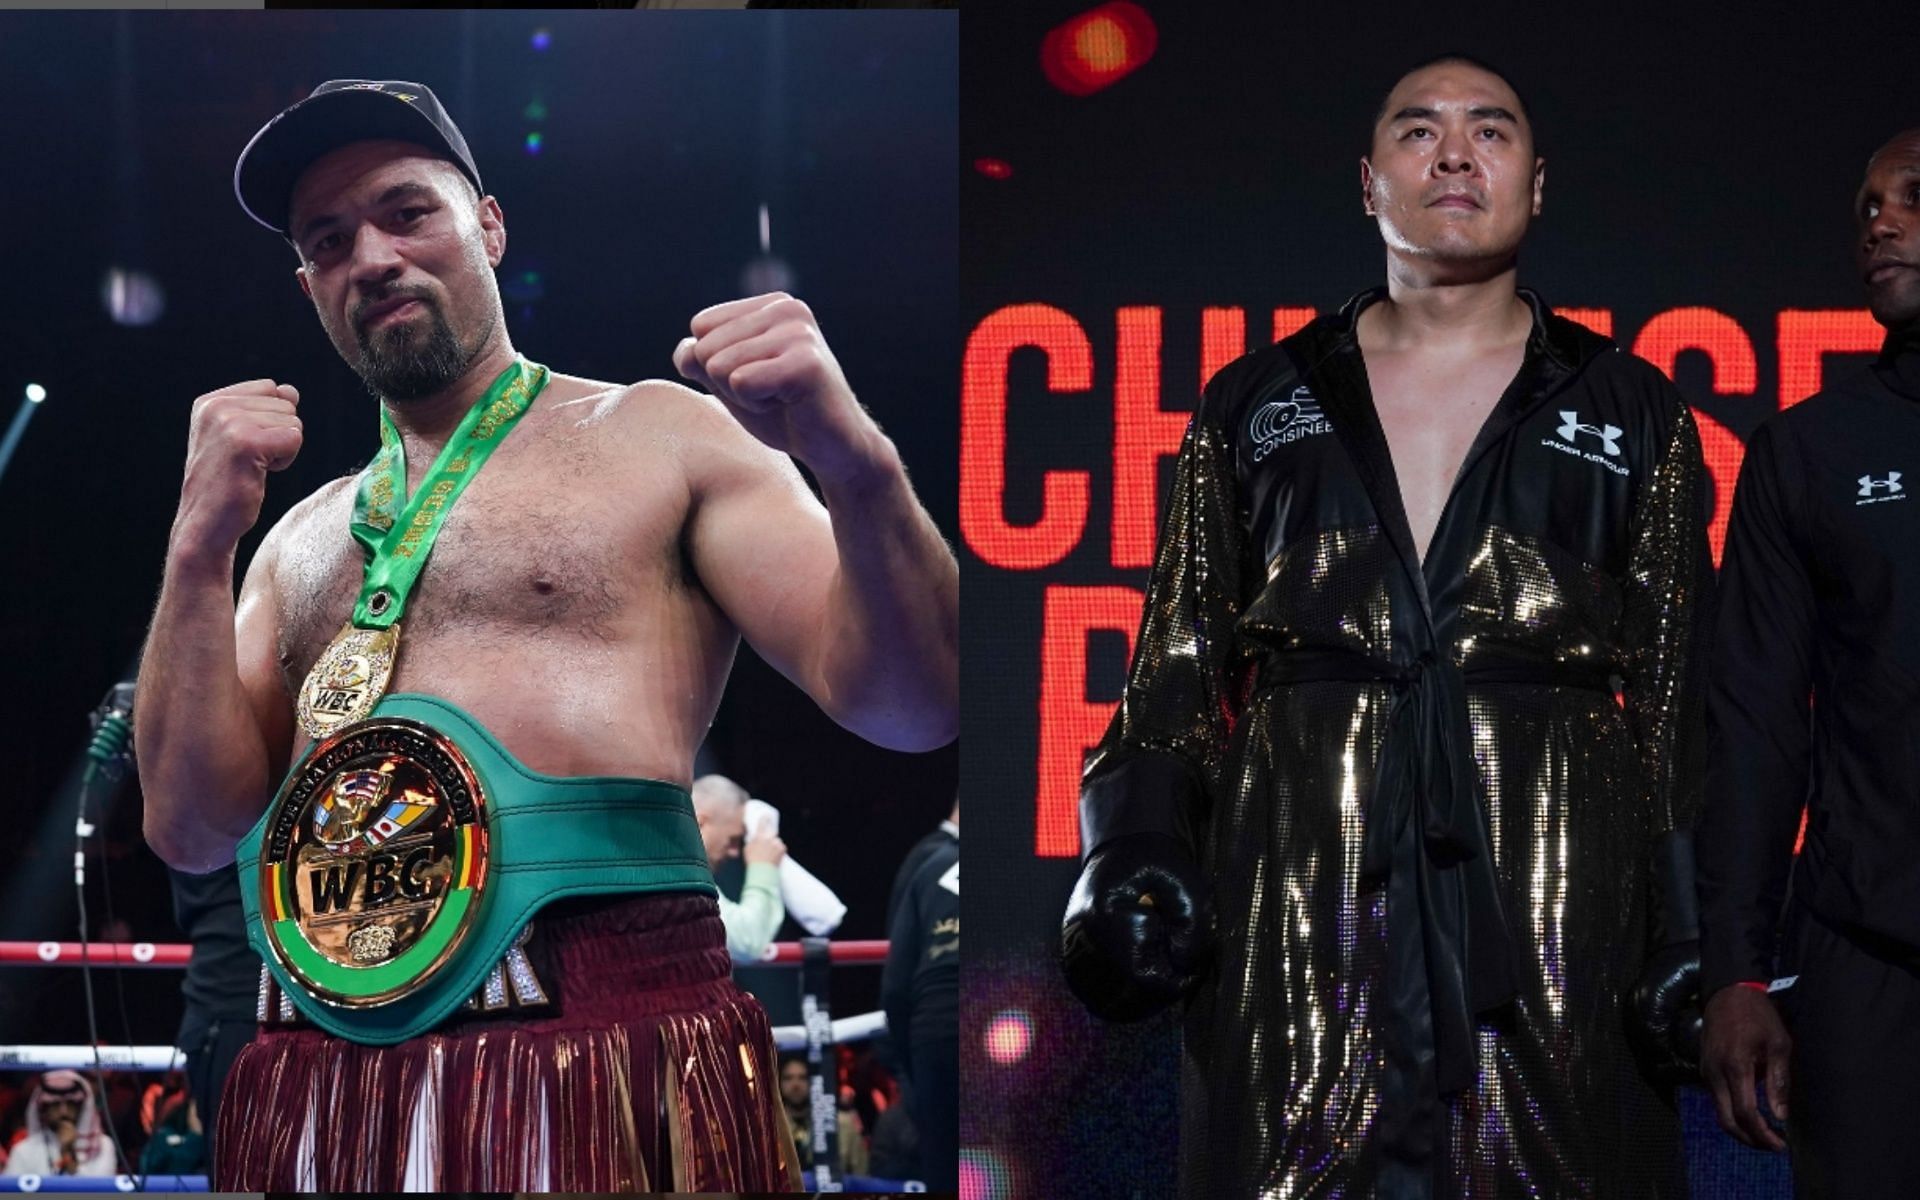 Zhilei Zhang vs. Joseph Parker is set for March 8. [Images via @zhileibigbangzhang and @joeboxerparker on Instagram]